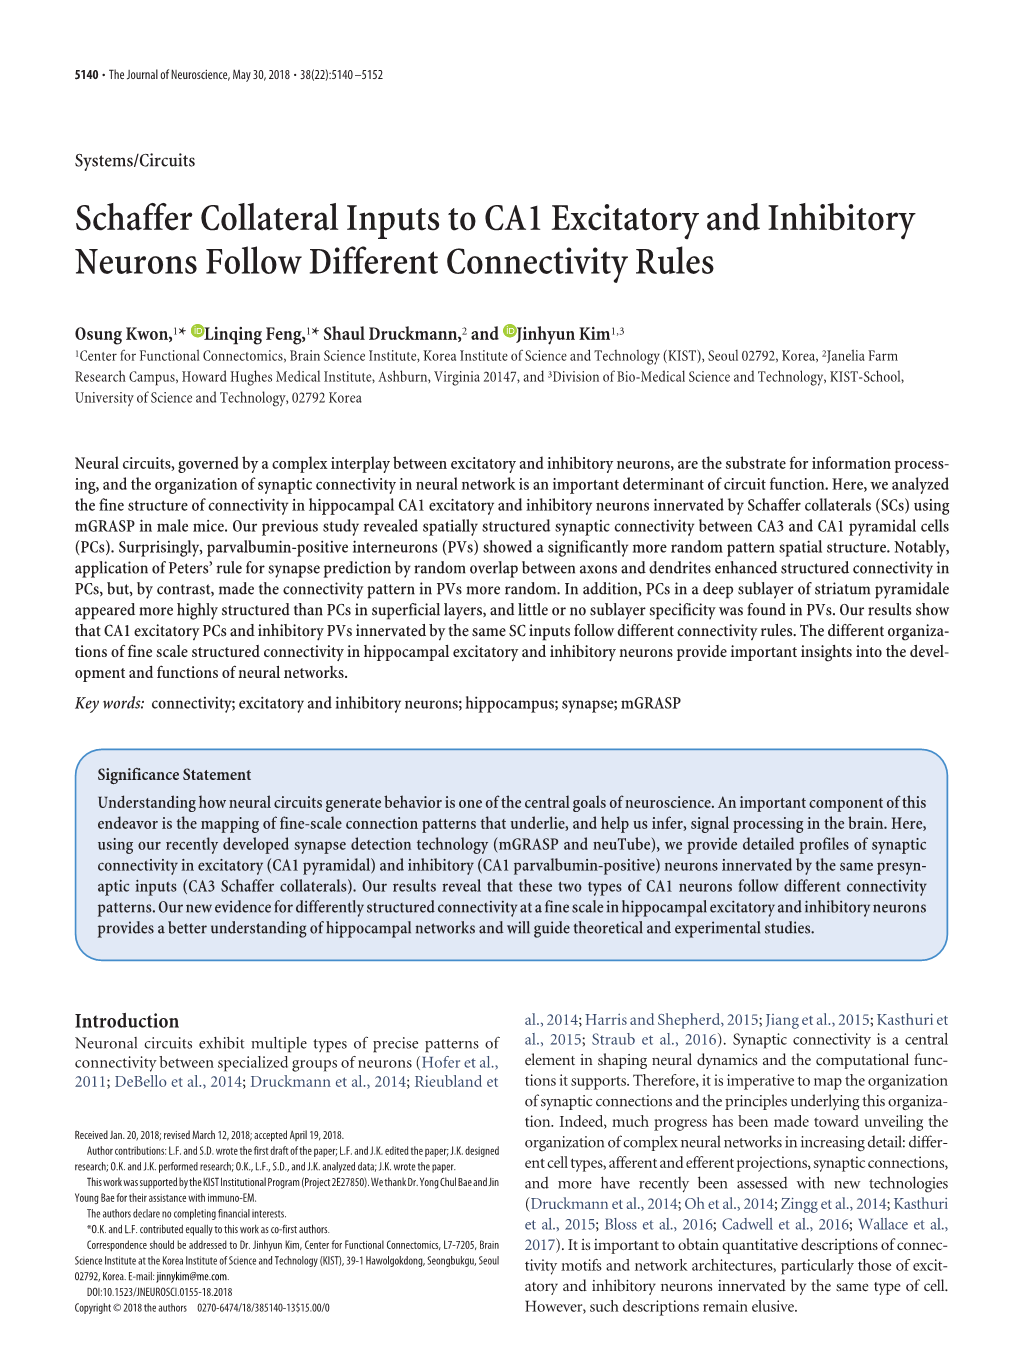 Schaffer Collateral Inputs to CA1 Excitatory and Inhibitory Neurons Follow Different Connectivity Rules